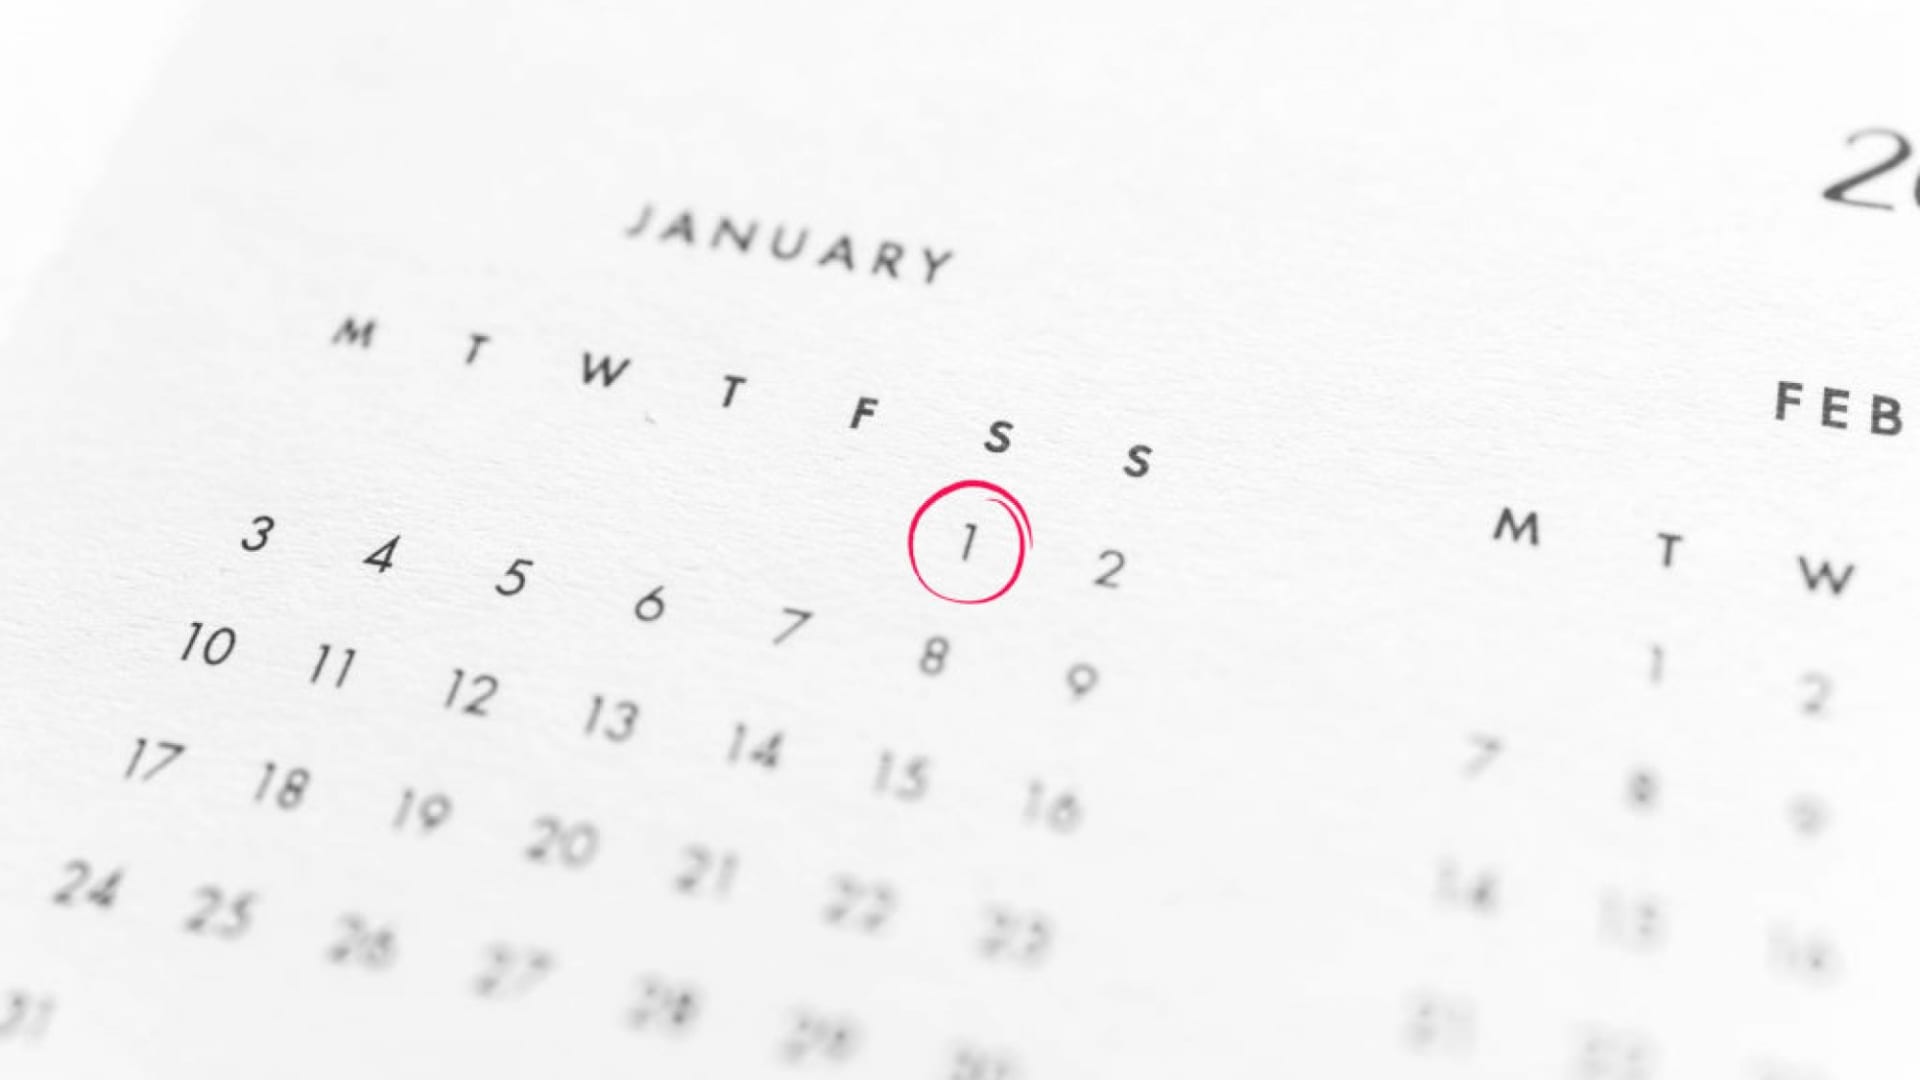 The Best Company Operators Know There's Nothing Magical About January 1